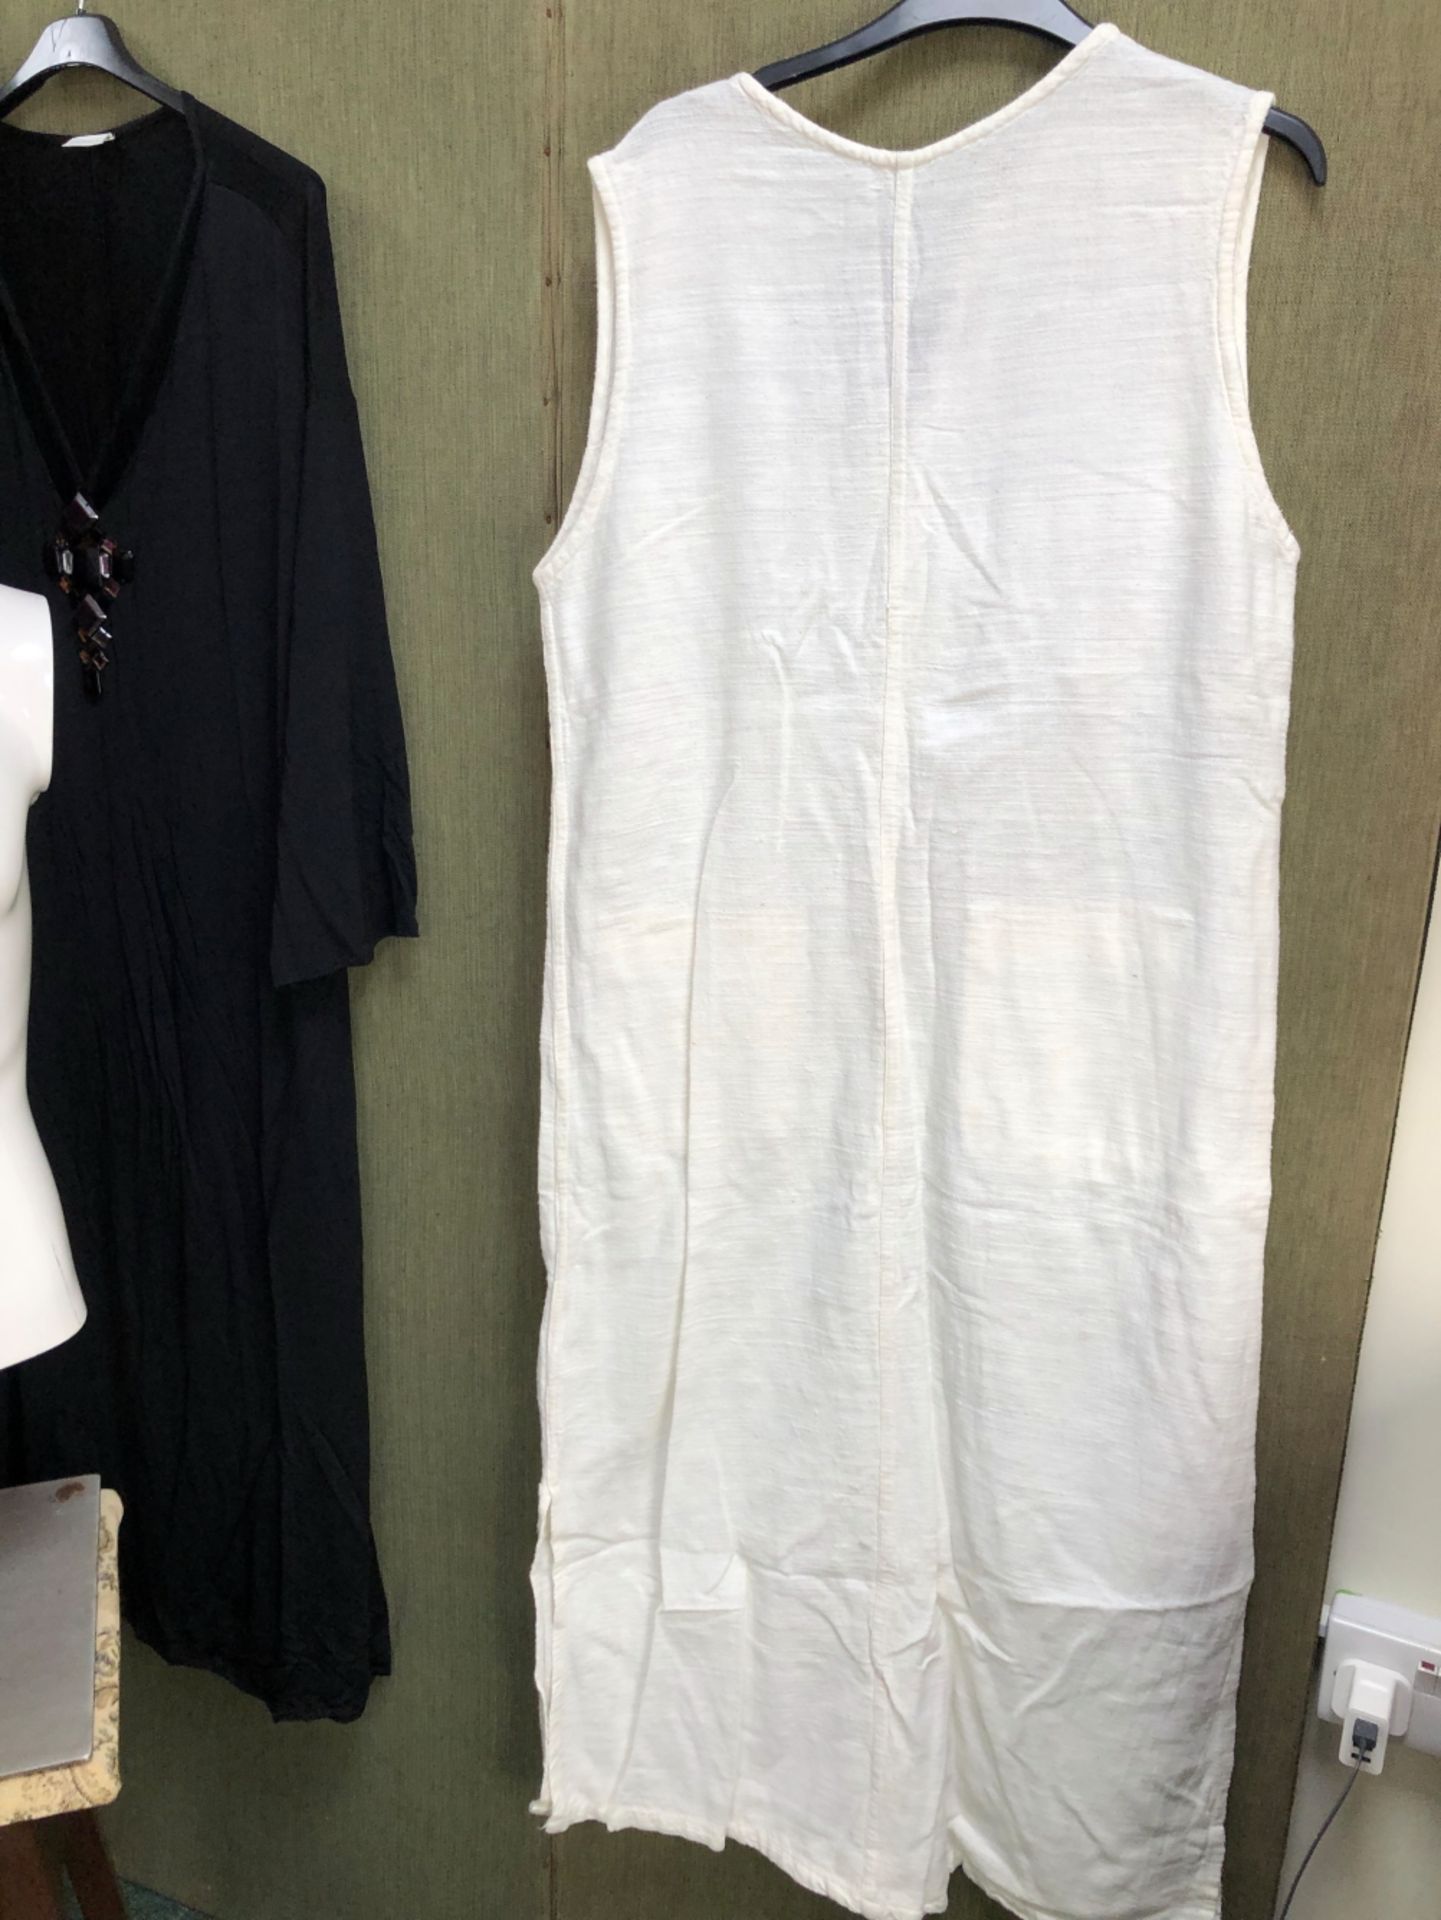 A GOTTEX BLACK AND WHITE CHECK LONG SLEEVED SHEER DRESS SIZE SMALL AND A LA PERLA SIZE 44 BLACK - Image 17 of 25